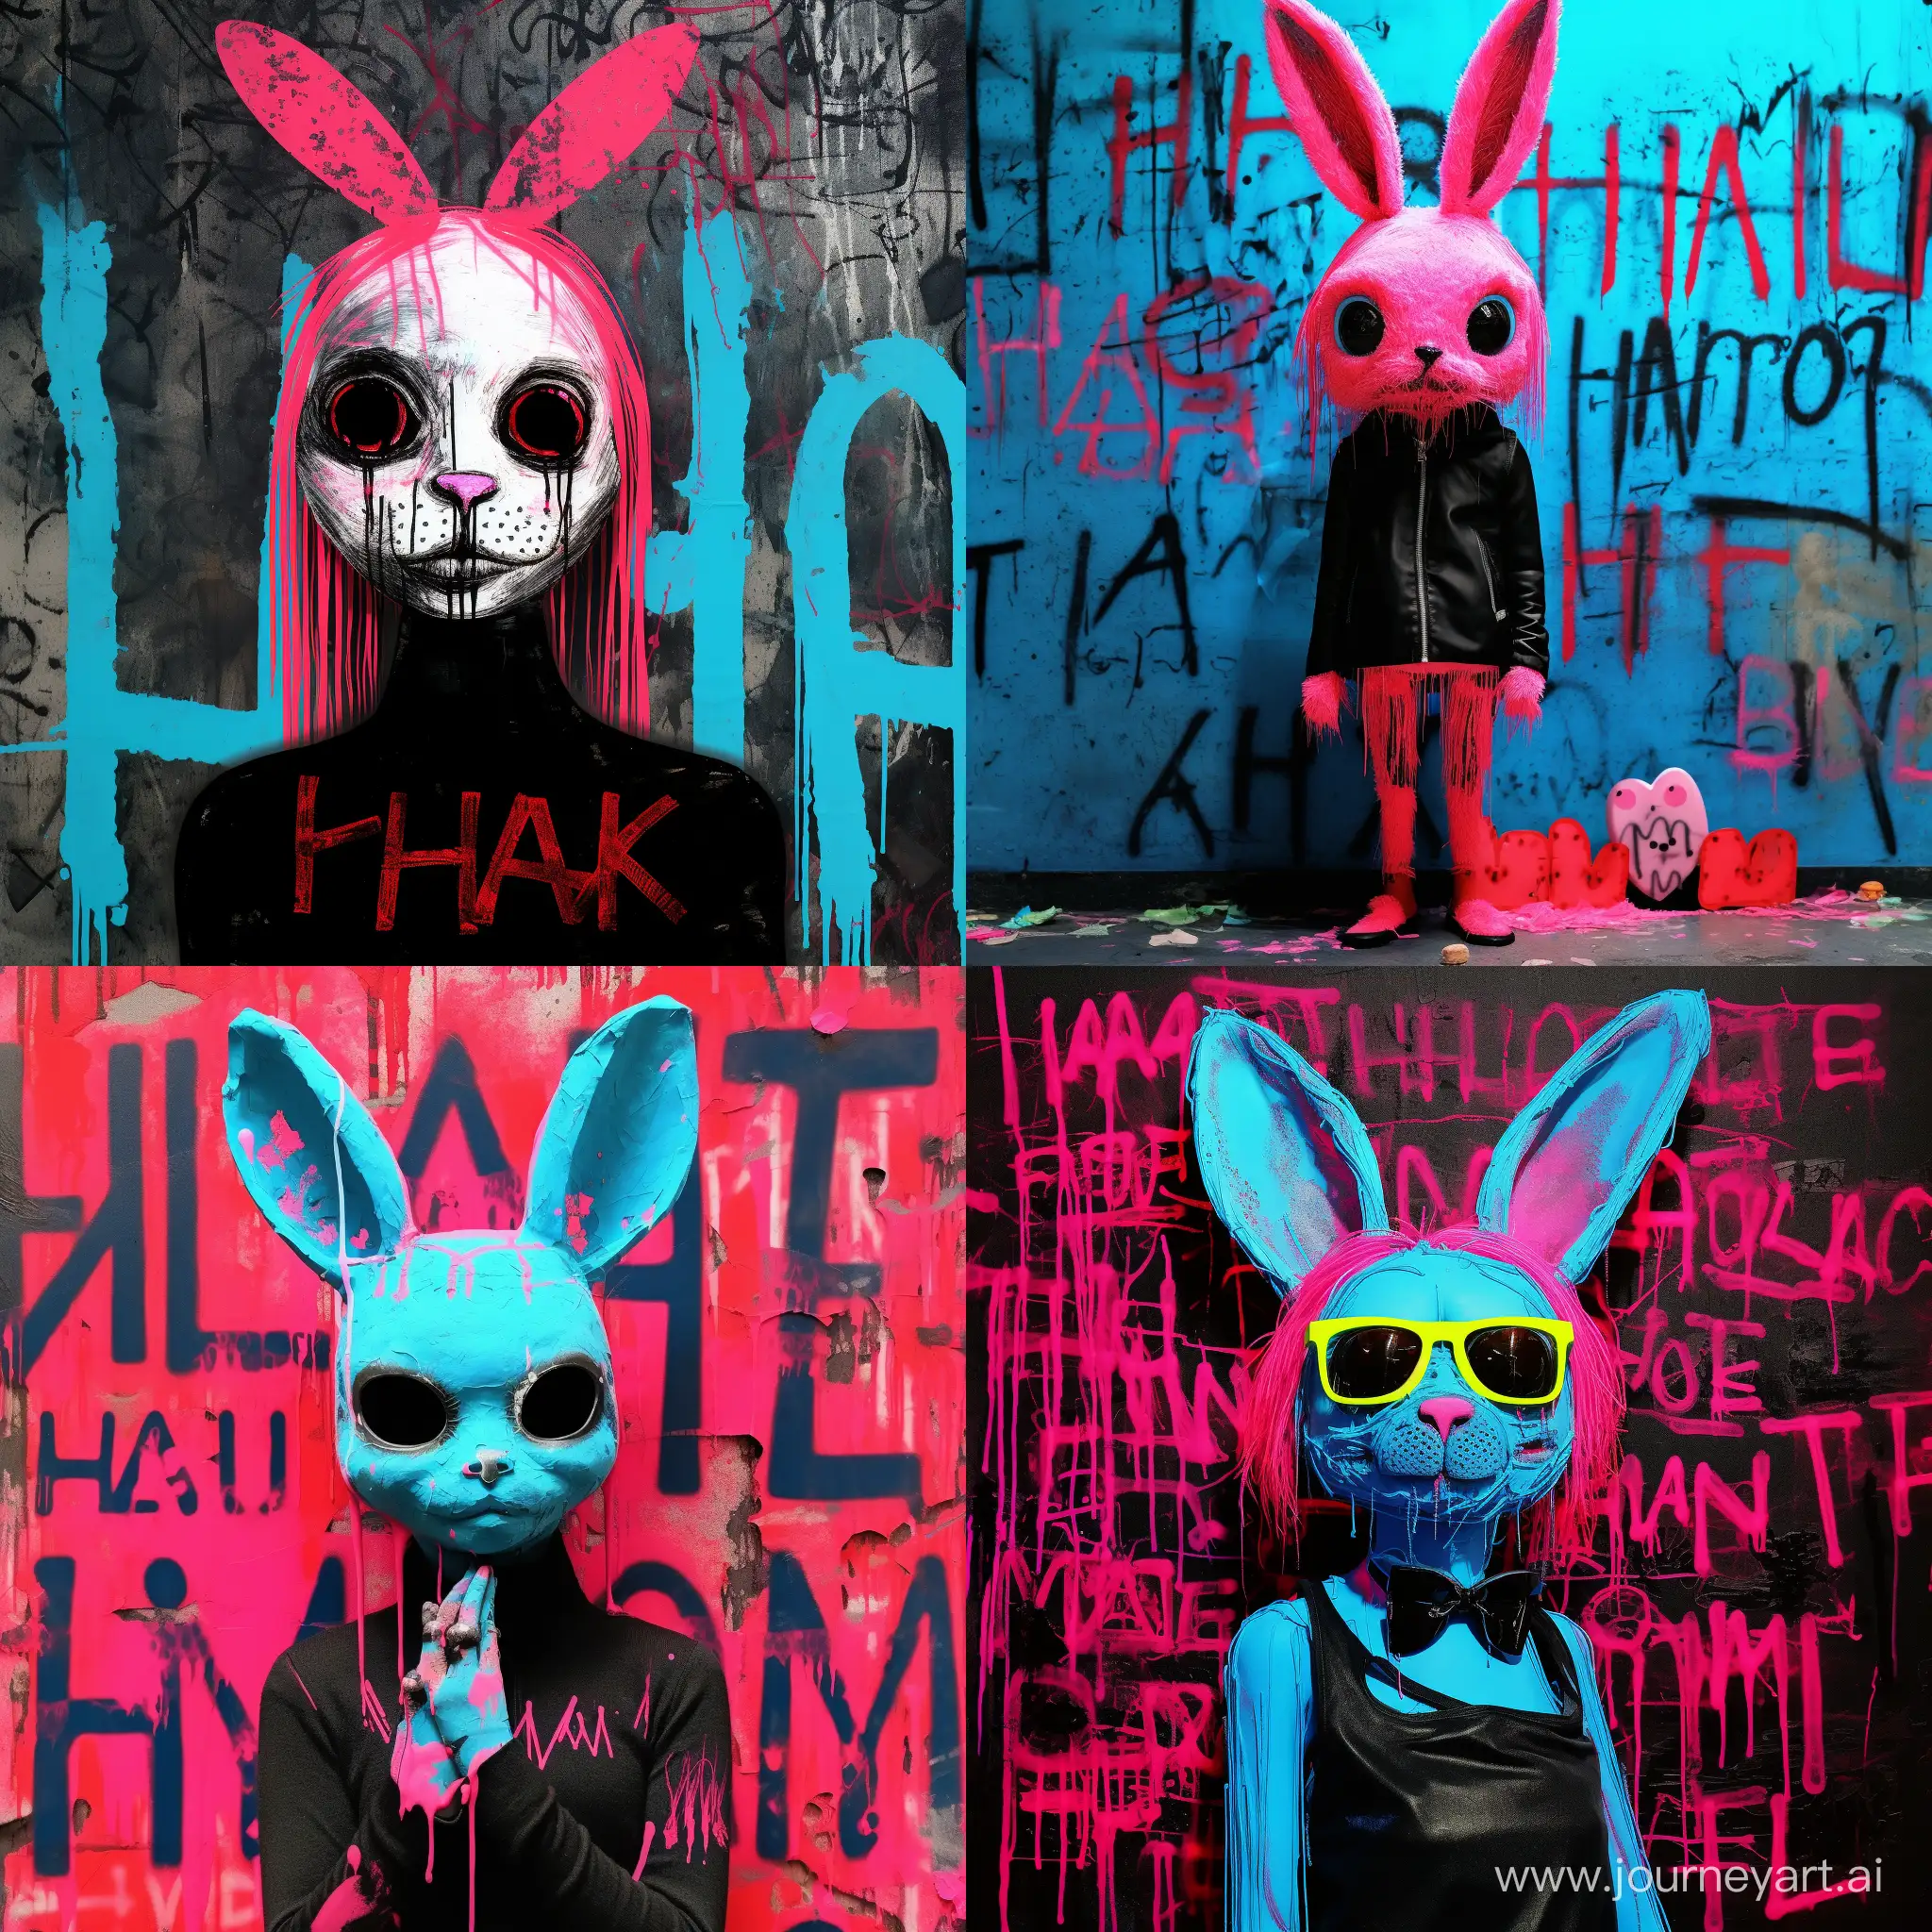 little pink haired bad bunny girl with red nail polish standing before a black and skull wrinkled texture, written on the wall in neon blue ink " HA HA HA"